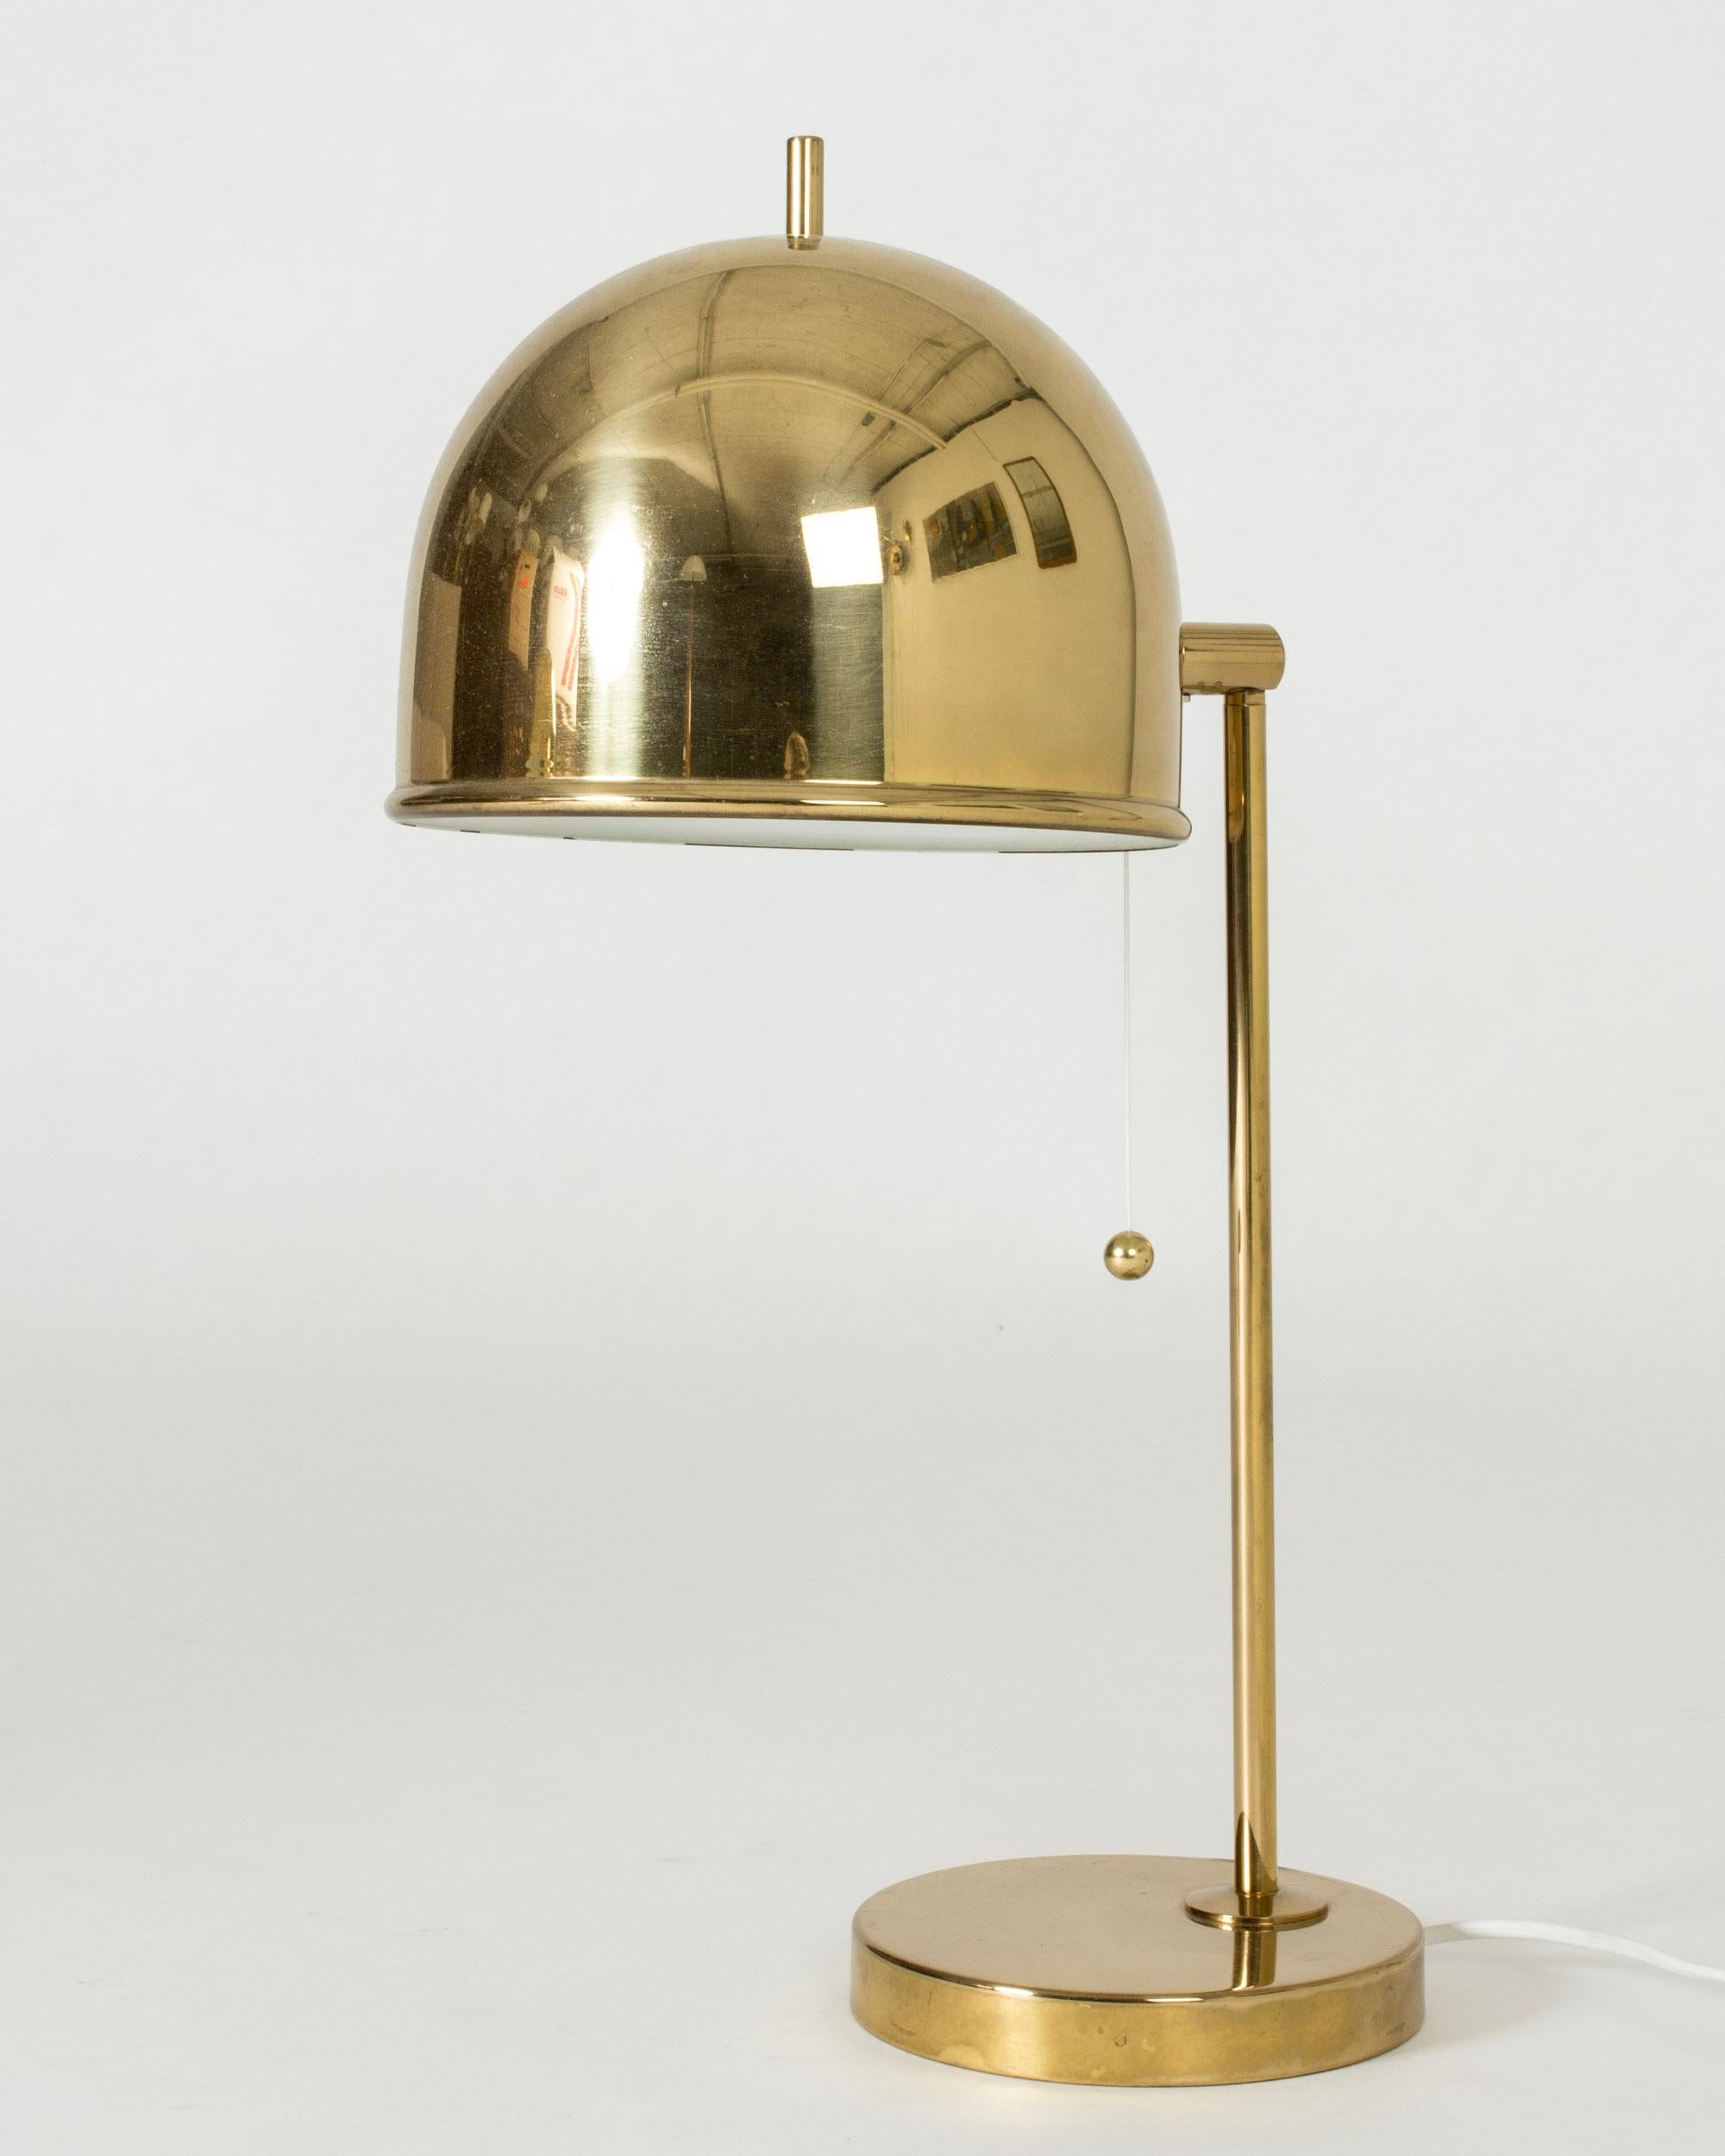 Brass table lamp from Bergboms with a dome shaped shade and strict lines. The little tip on the top of the shade is a fun detail.